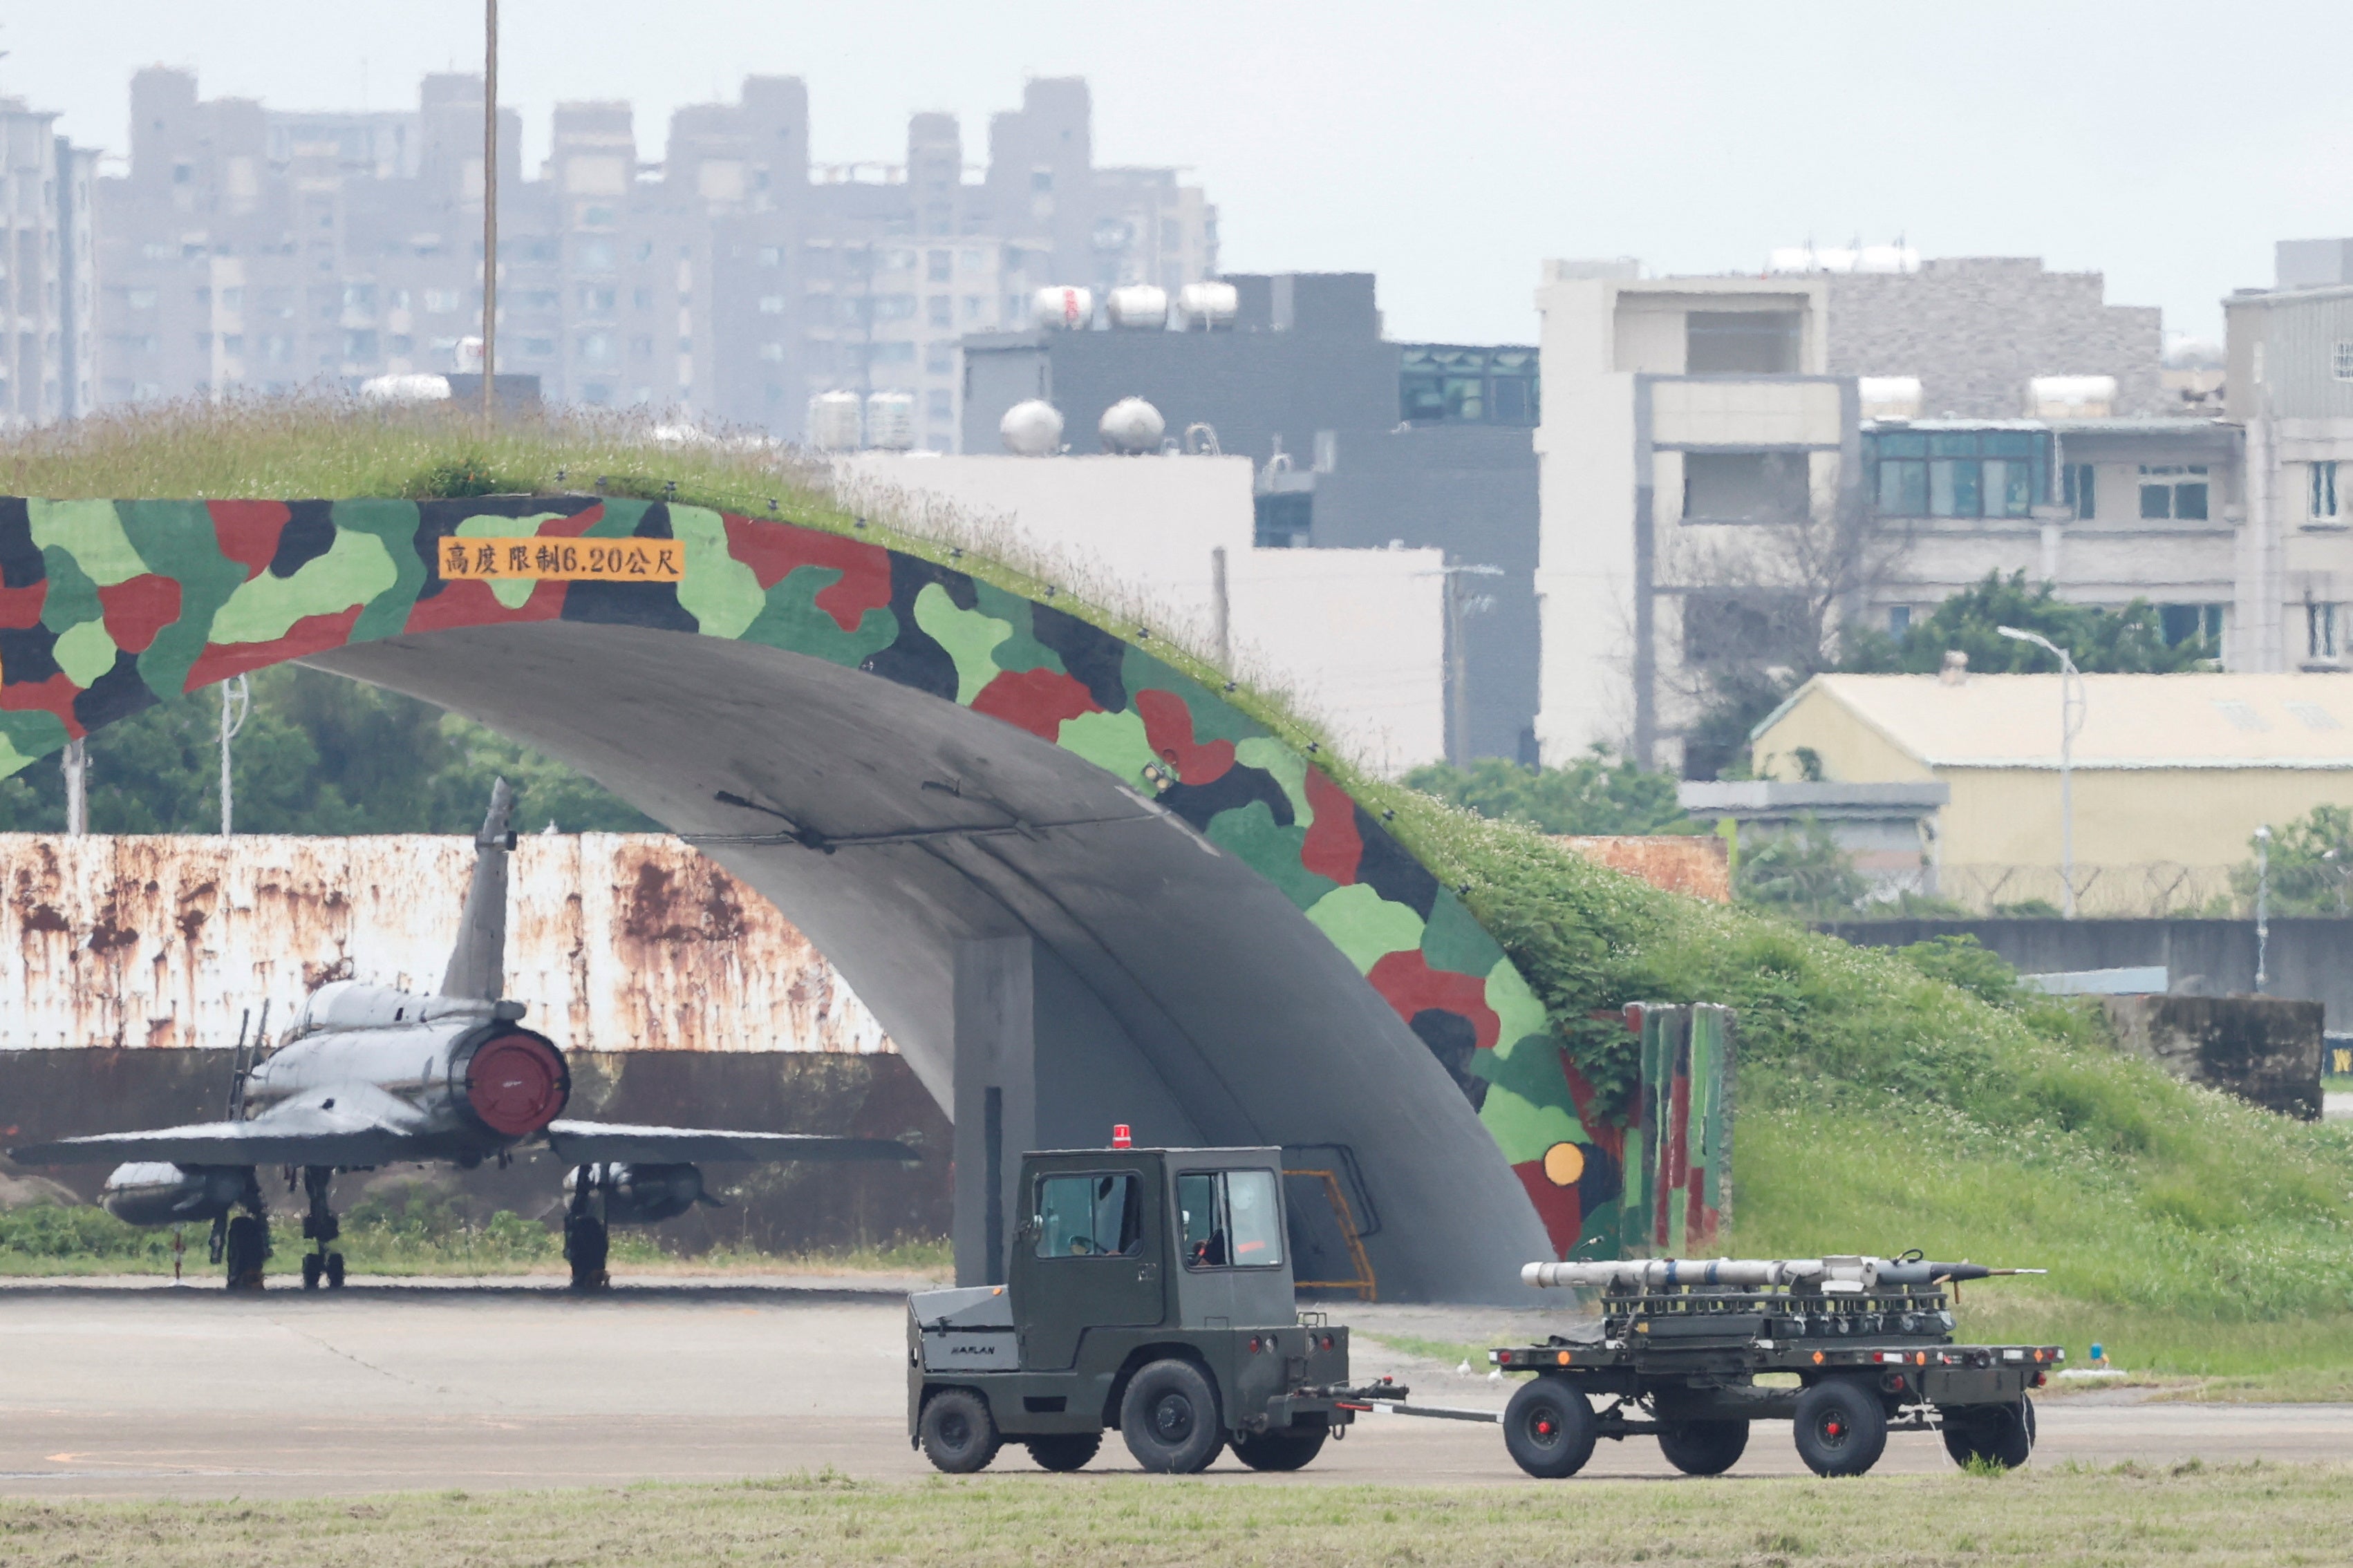 Ground staff members transport missiles near a Taiwan Air Force Mirage 2000-5 aircraft at Hsinchu Air Base, in Hsinchu